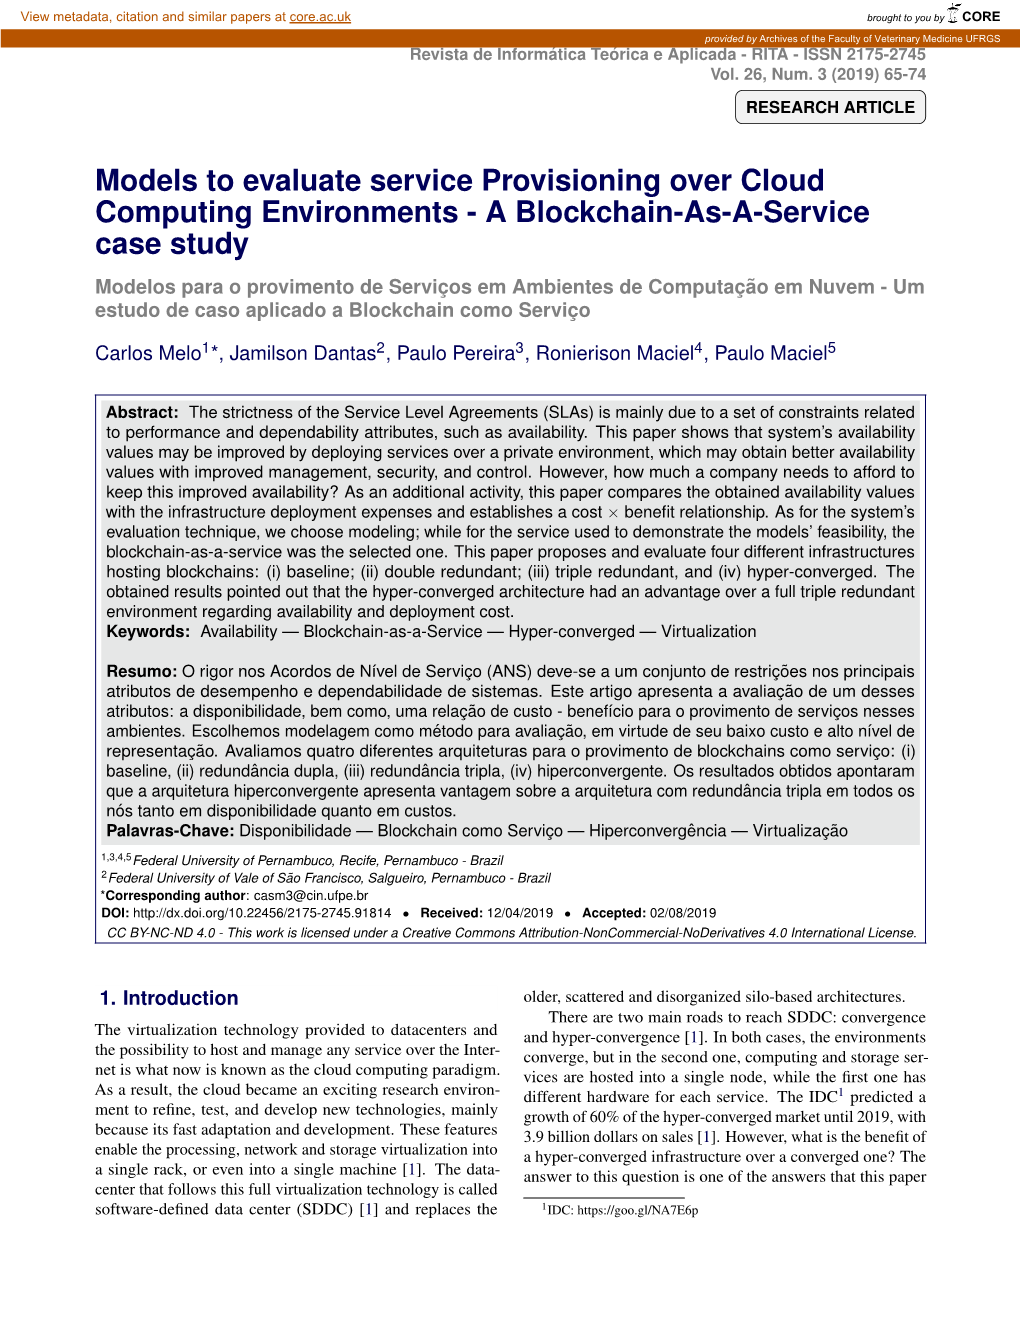 Models to Evaluate Service Provisioning Over Cloud